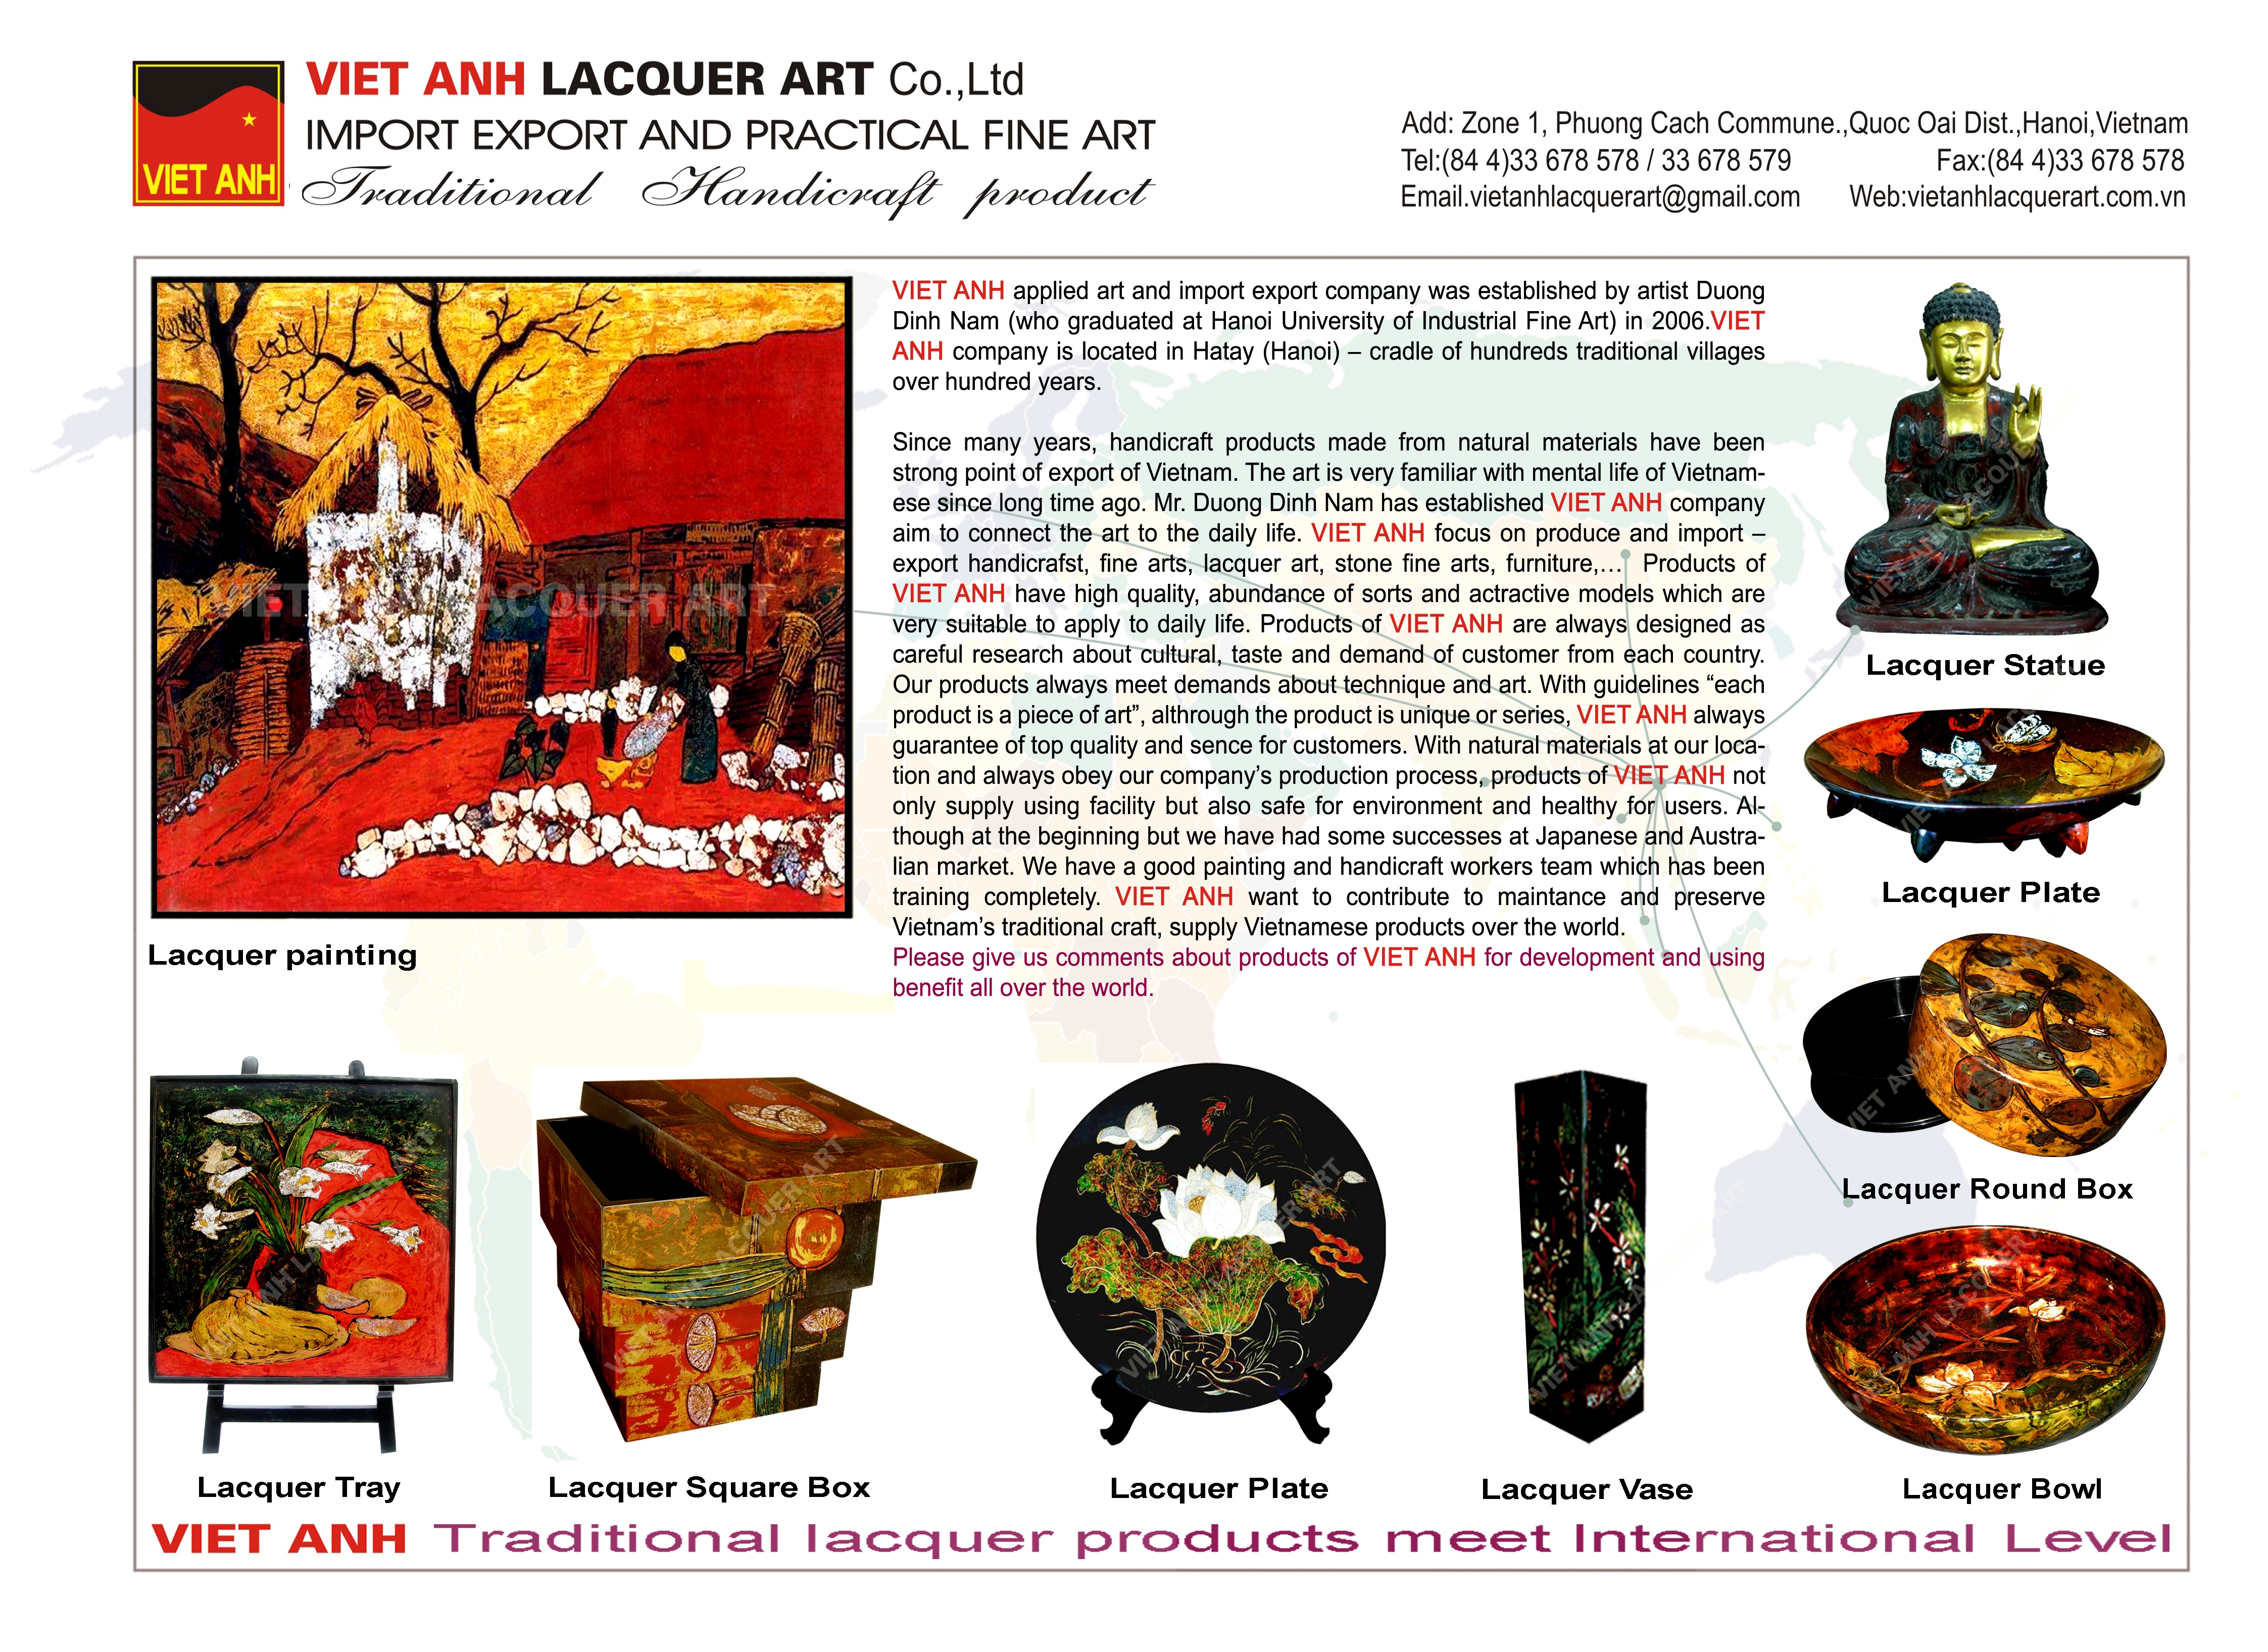 Viet Anh Lacquer Art